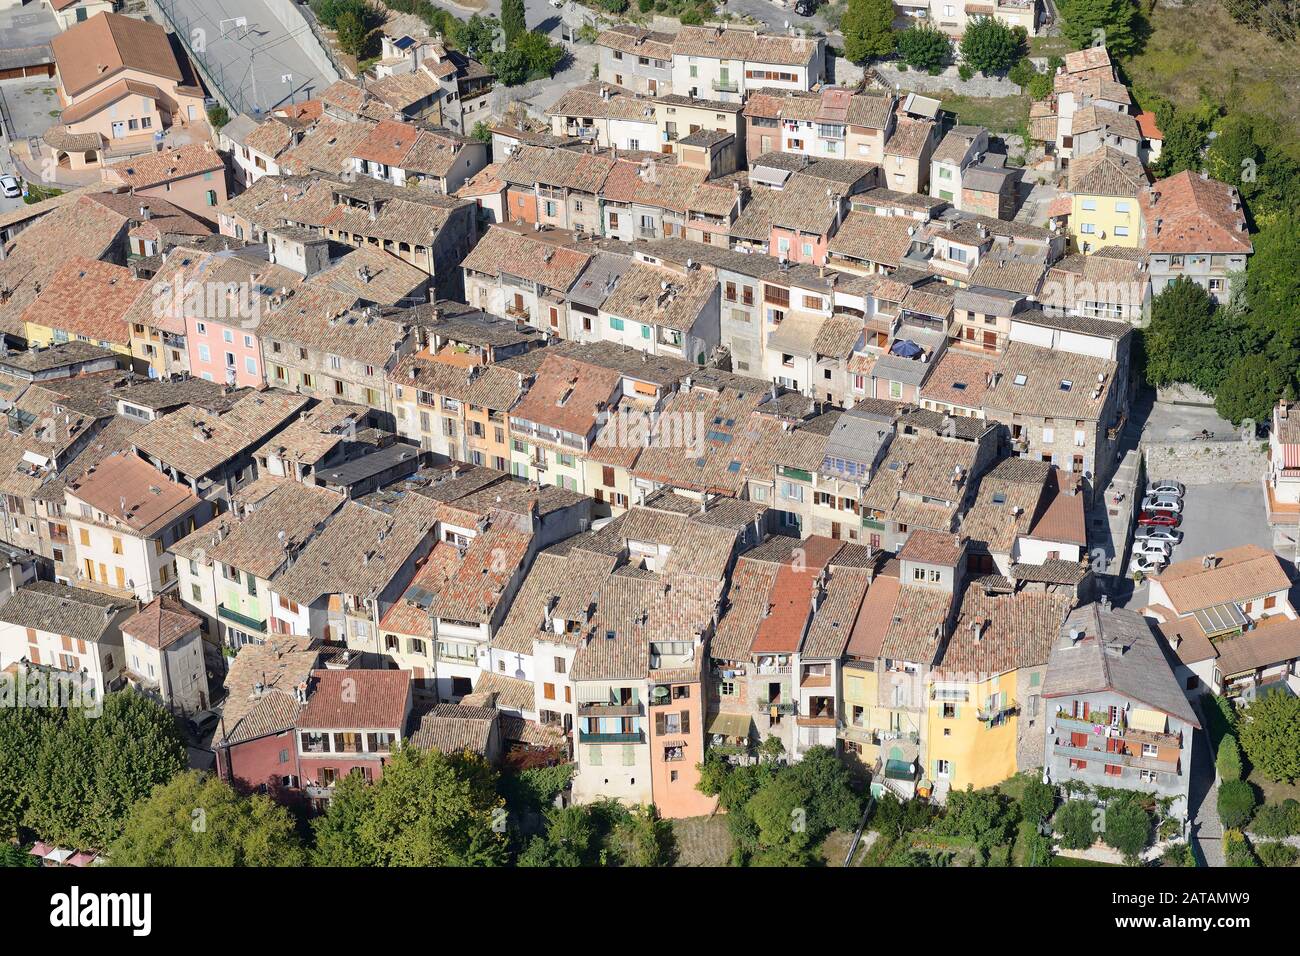 AERIAL VIEW. Small medieval town in the Var Valley of the French Riviera's backcountry. Puget-Théniers, Alpes-Maritimes, France. Stock Photo